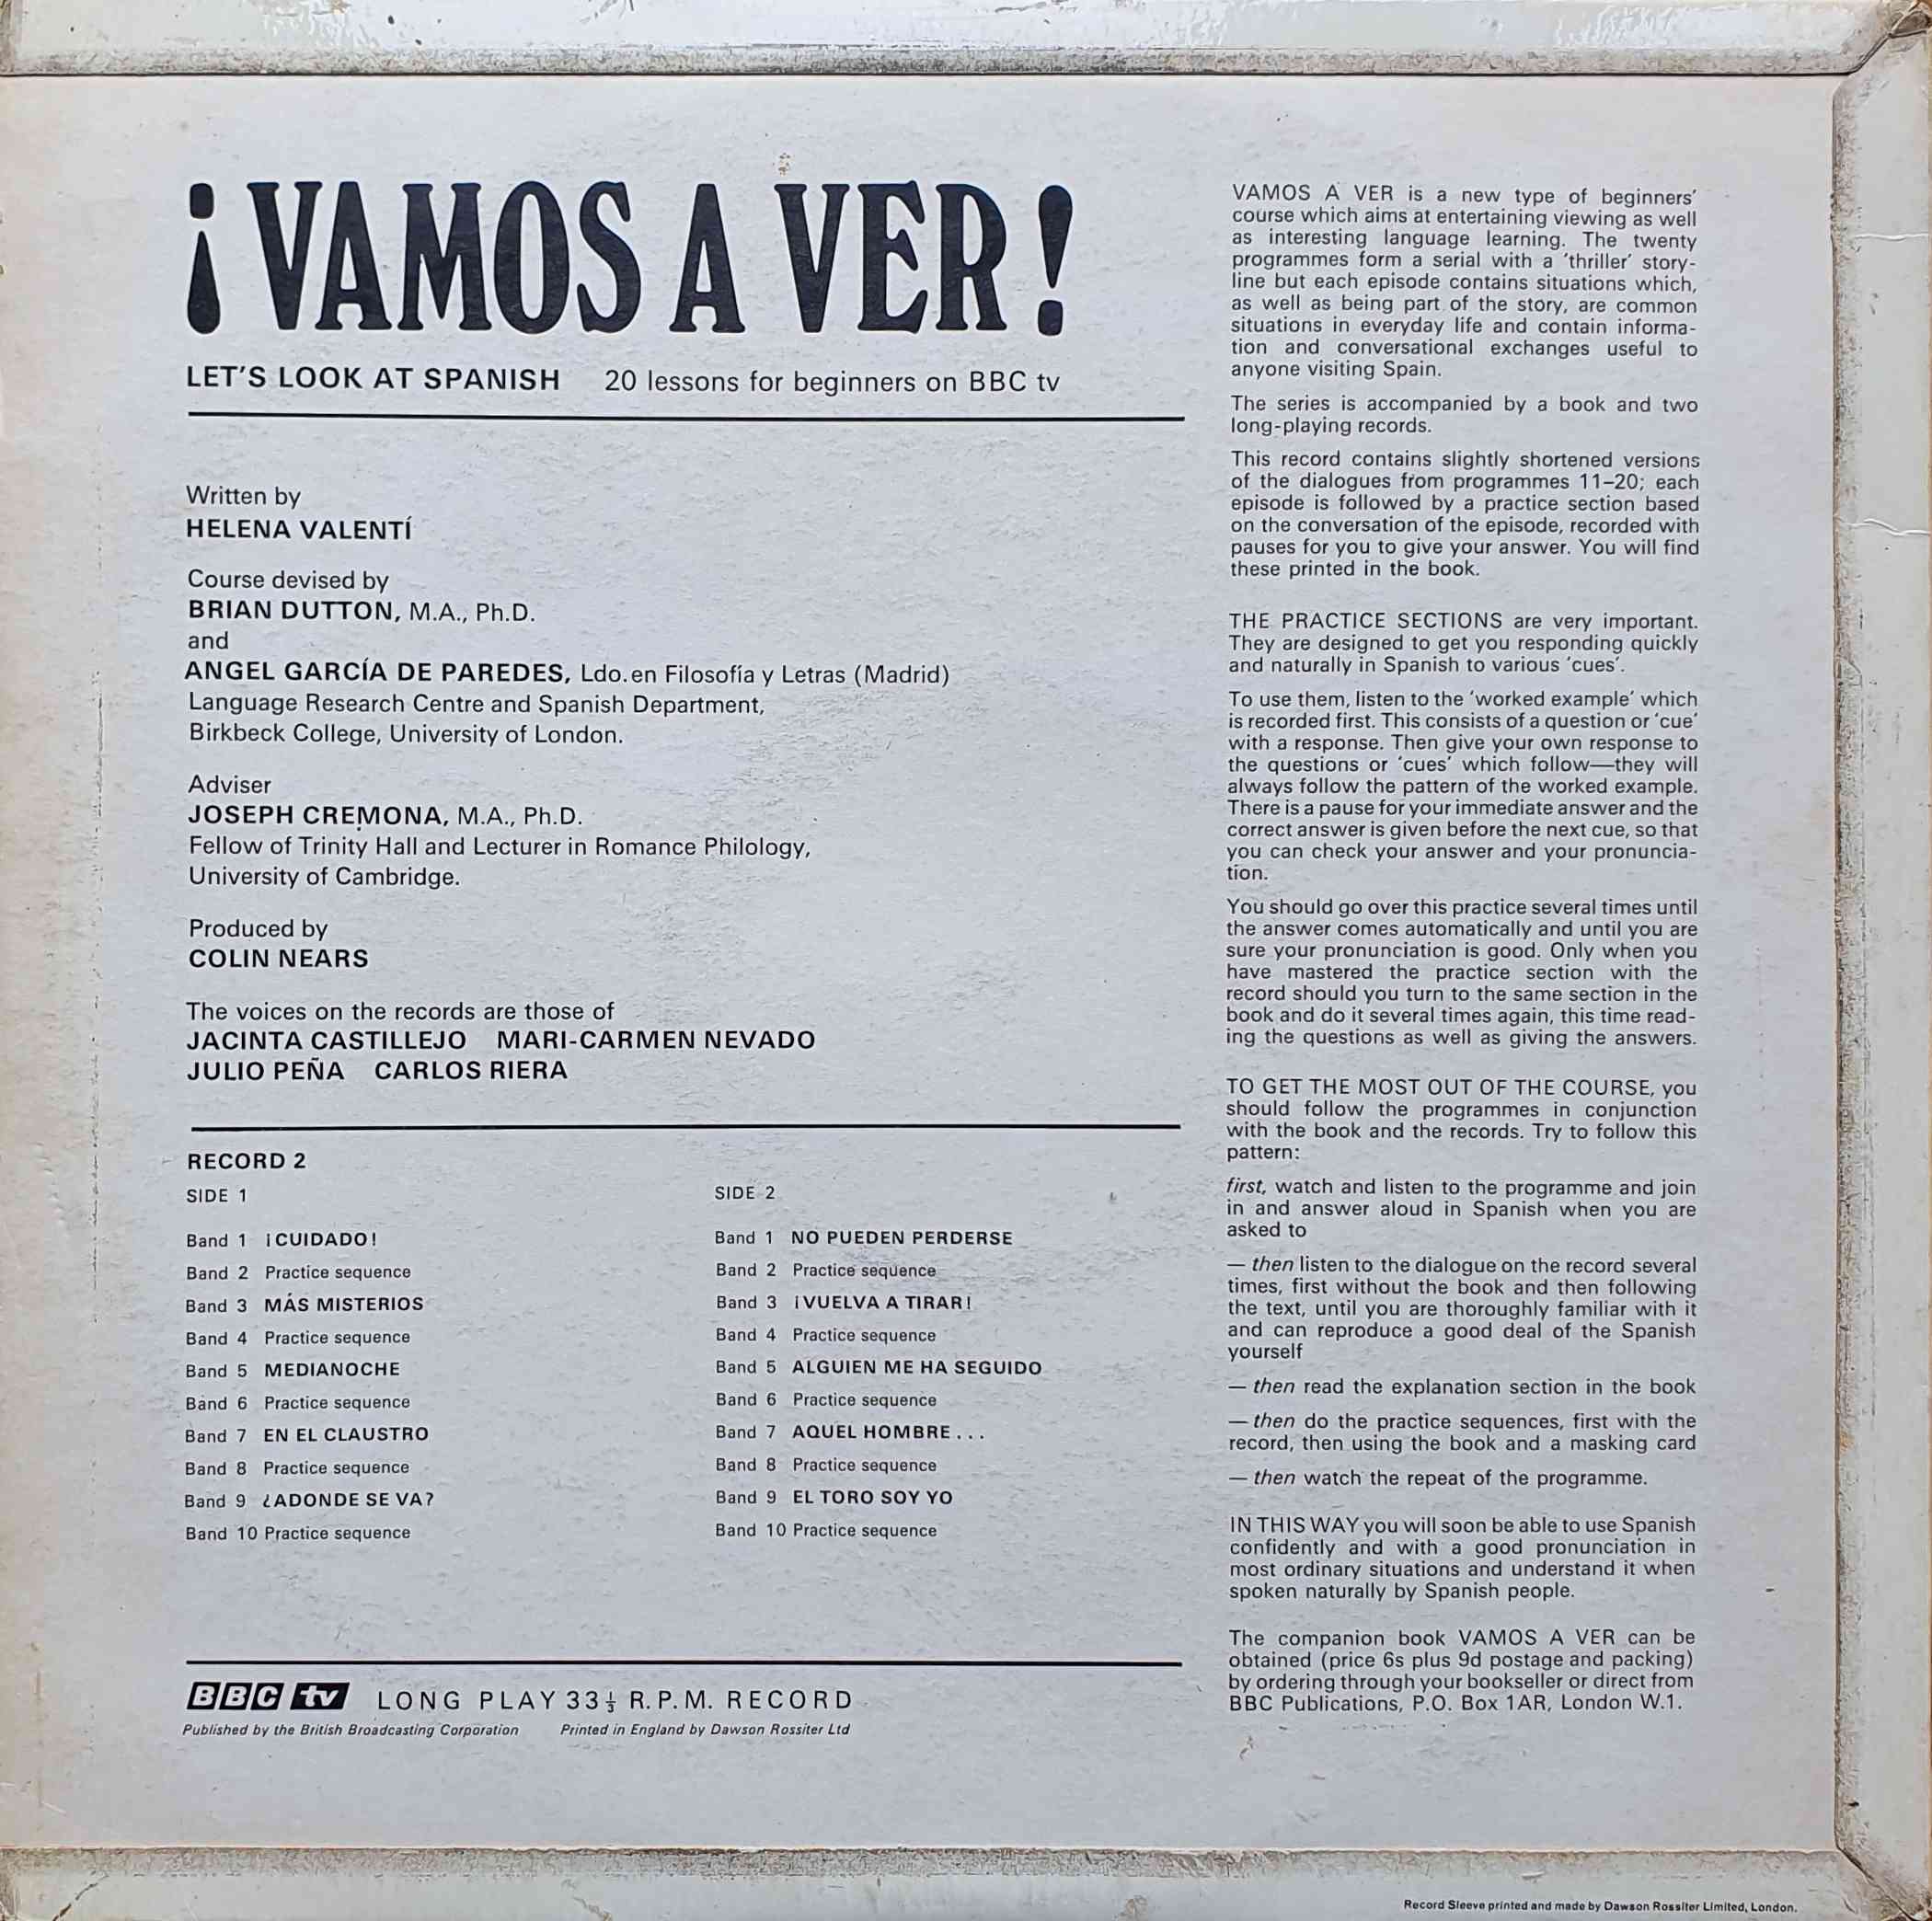 Picture of OP 111/112 Vamos A Ver - Let's look at Spanish on BBC tv - Record 2 by artist Helena Valenti / Brian Dutton / Angel Garcia De Paredes / Joseph Cremona from the BBC records and Tapes library